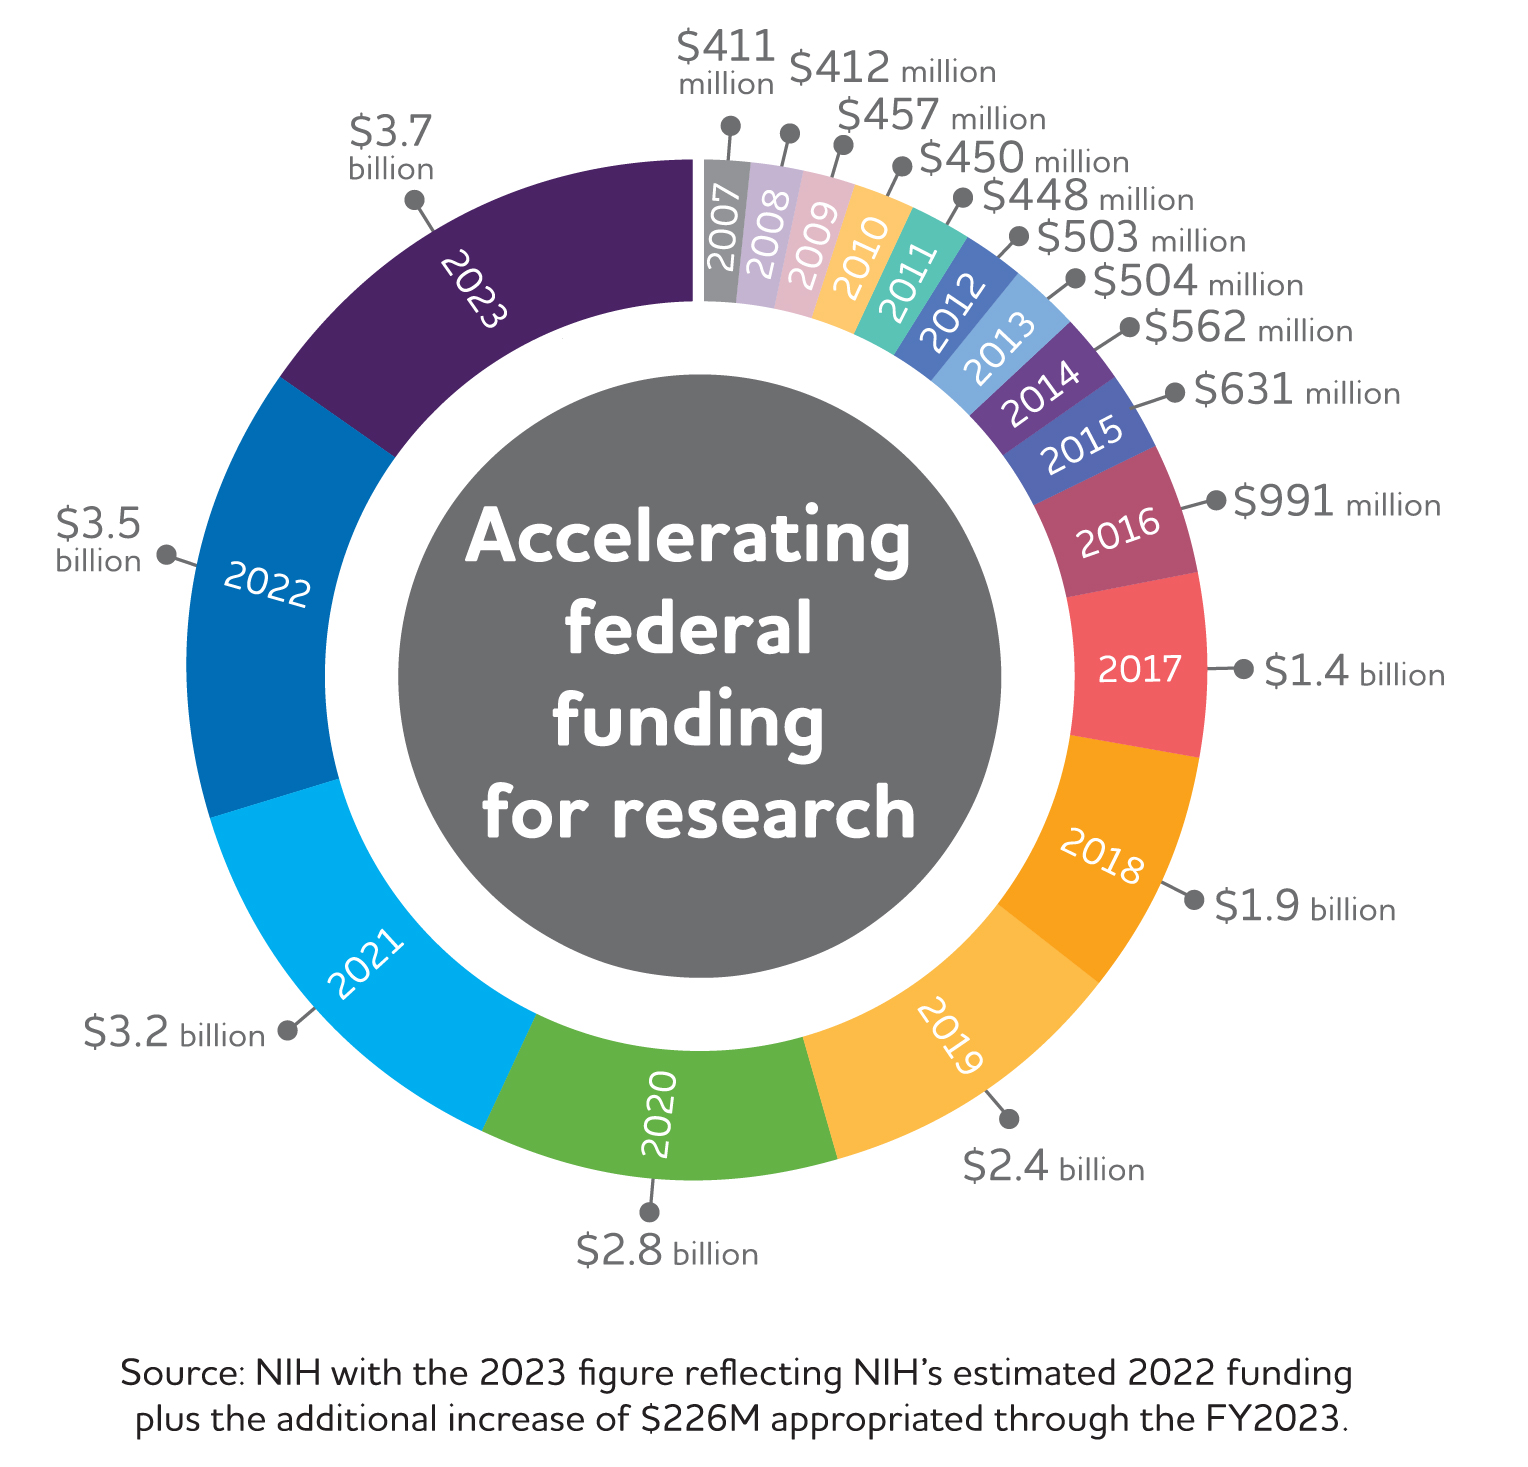 Since 2007, funding has grown from $411 million to over $3.5 billion for FY 2022.